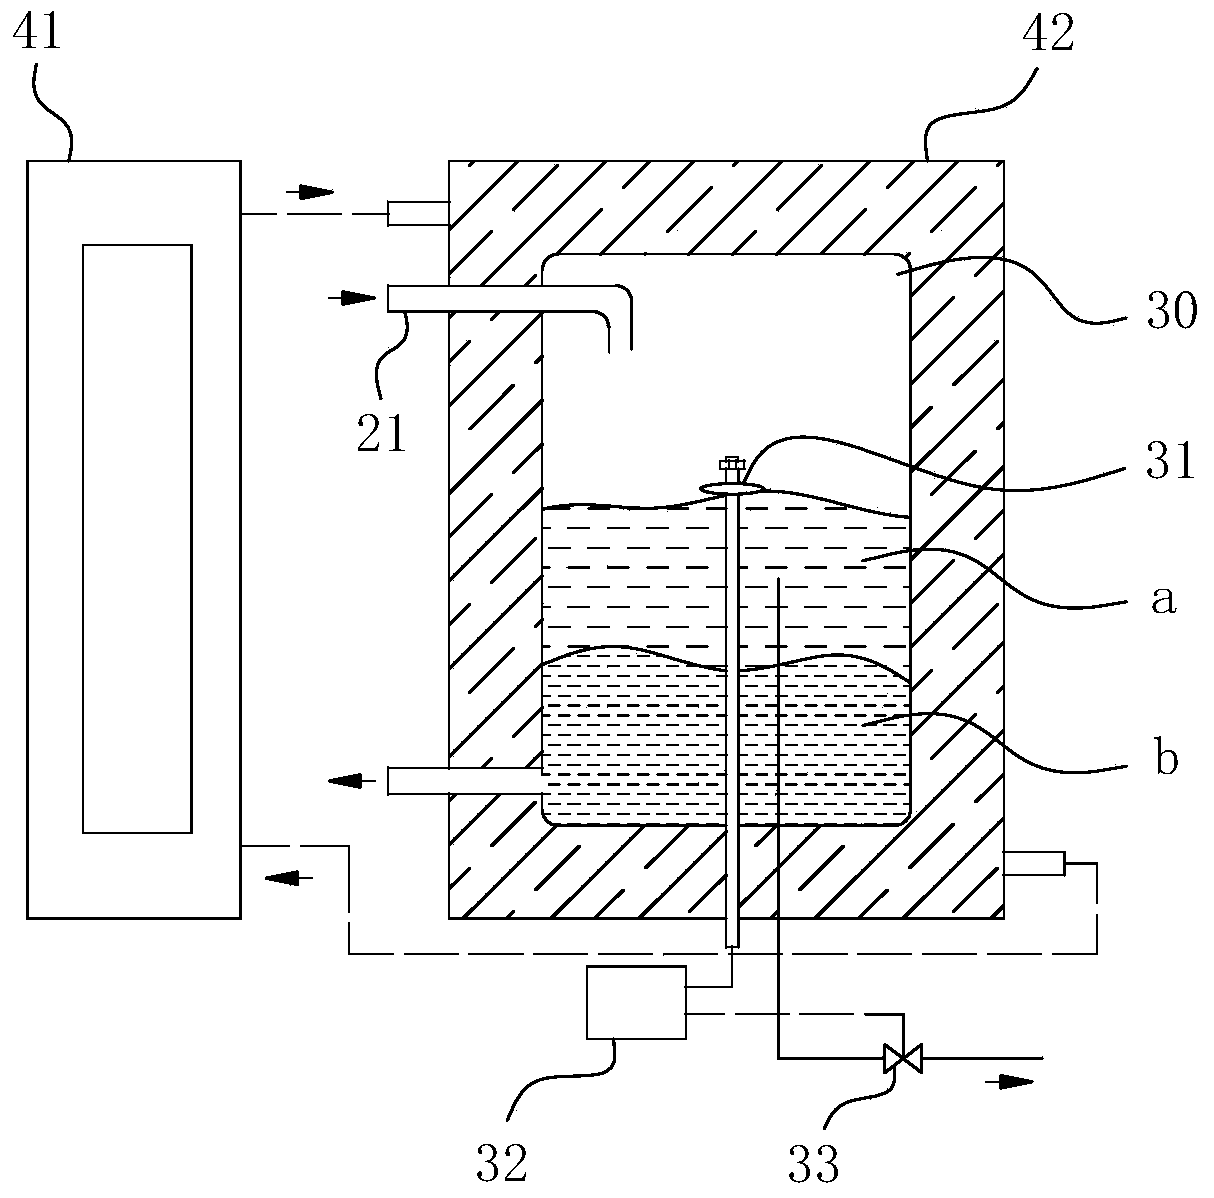 Refrigerant compressor oil circulation rate measuring and testing device based on intermiscibility